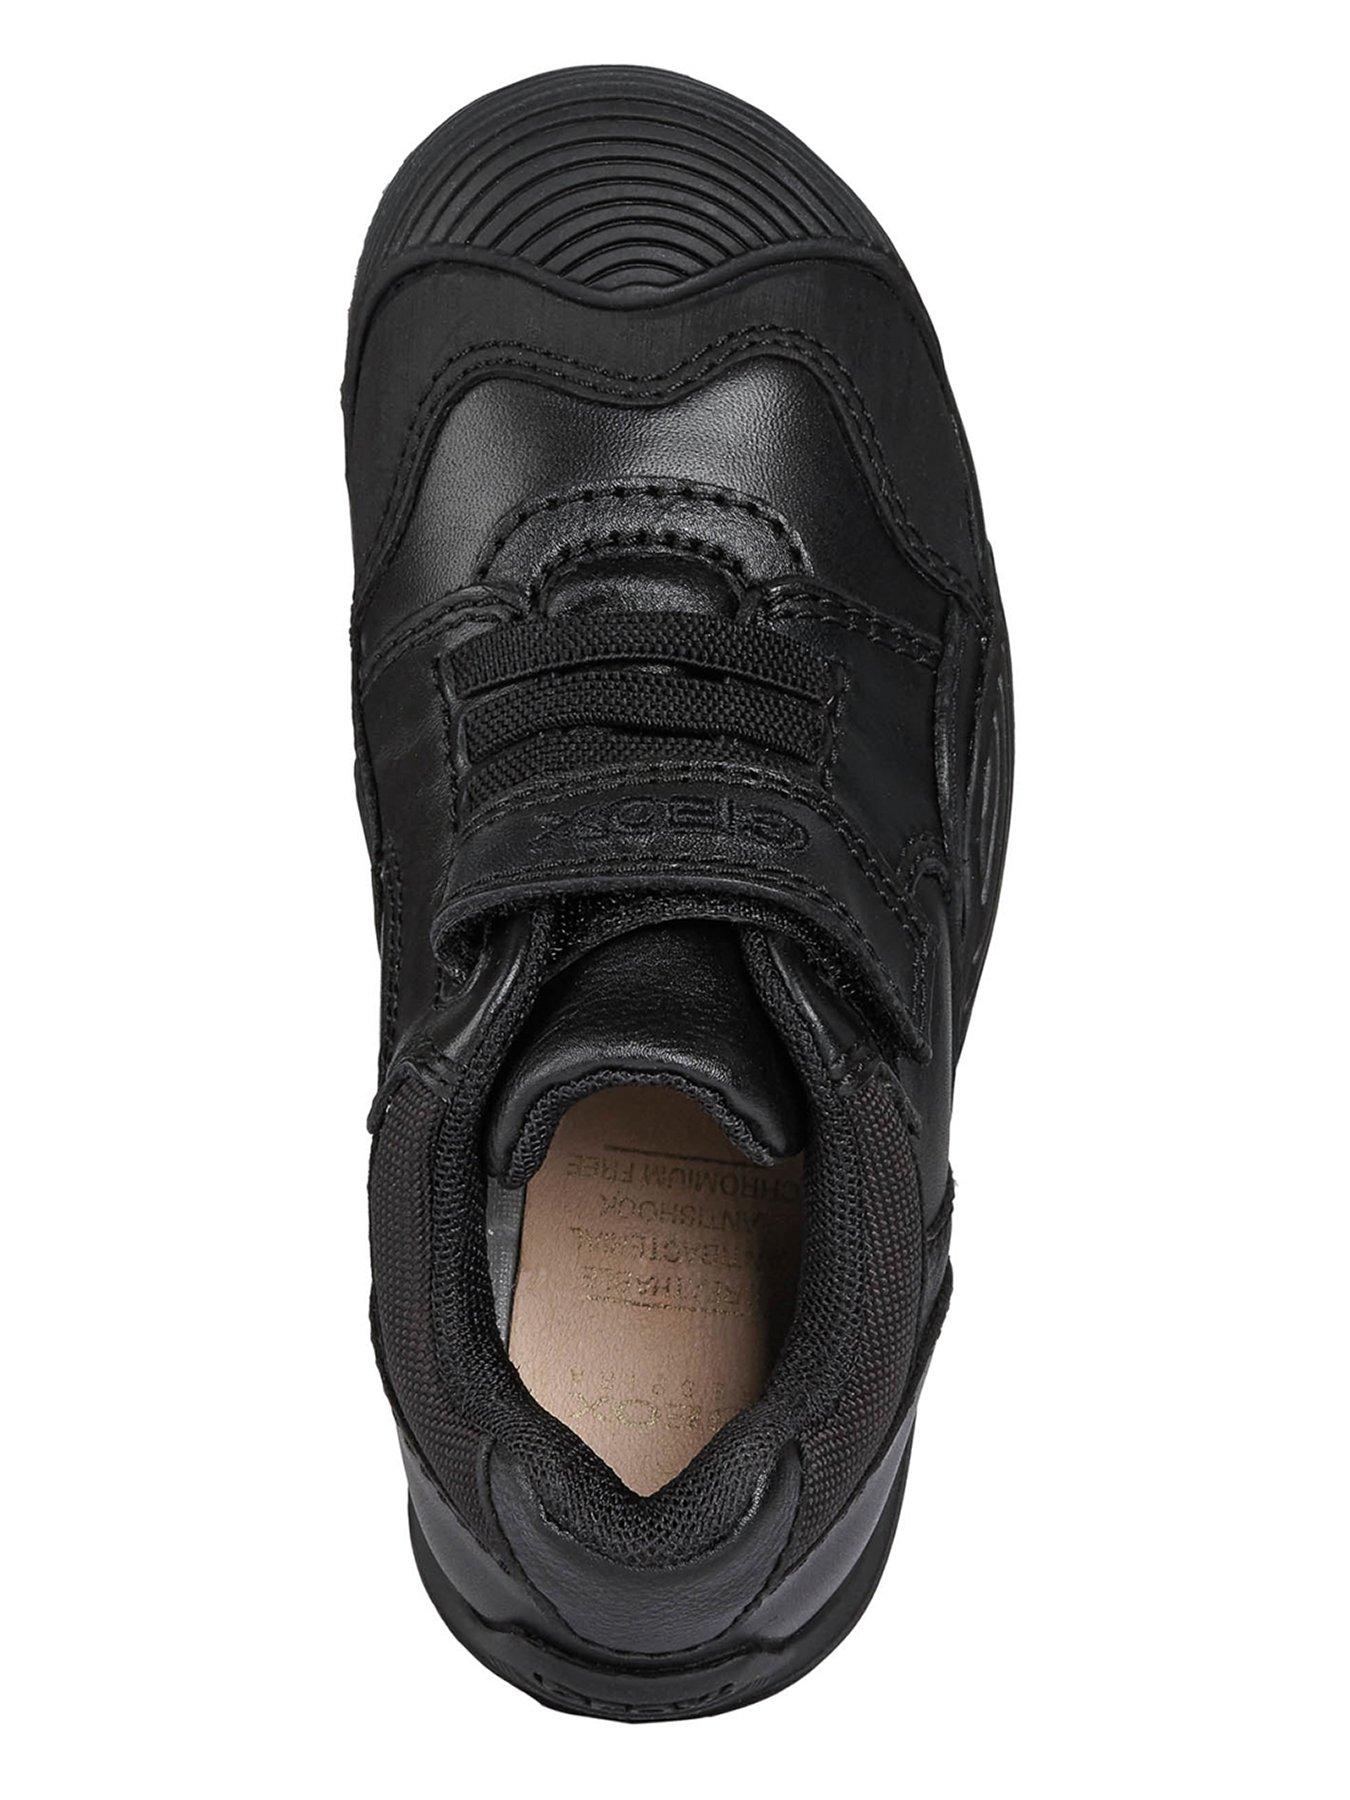 Kids Boys Savage Leather Strap and Lace School Shoe - Black